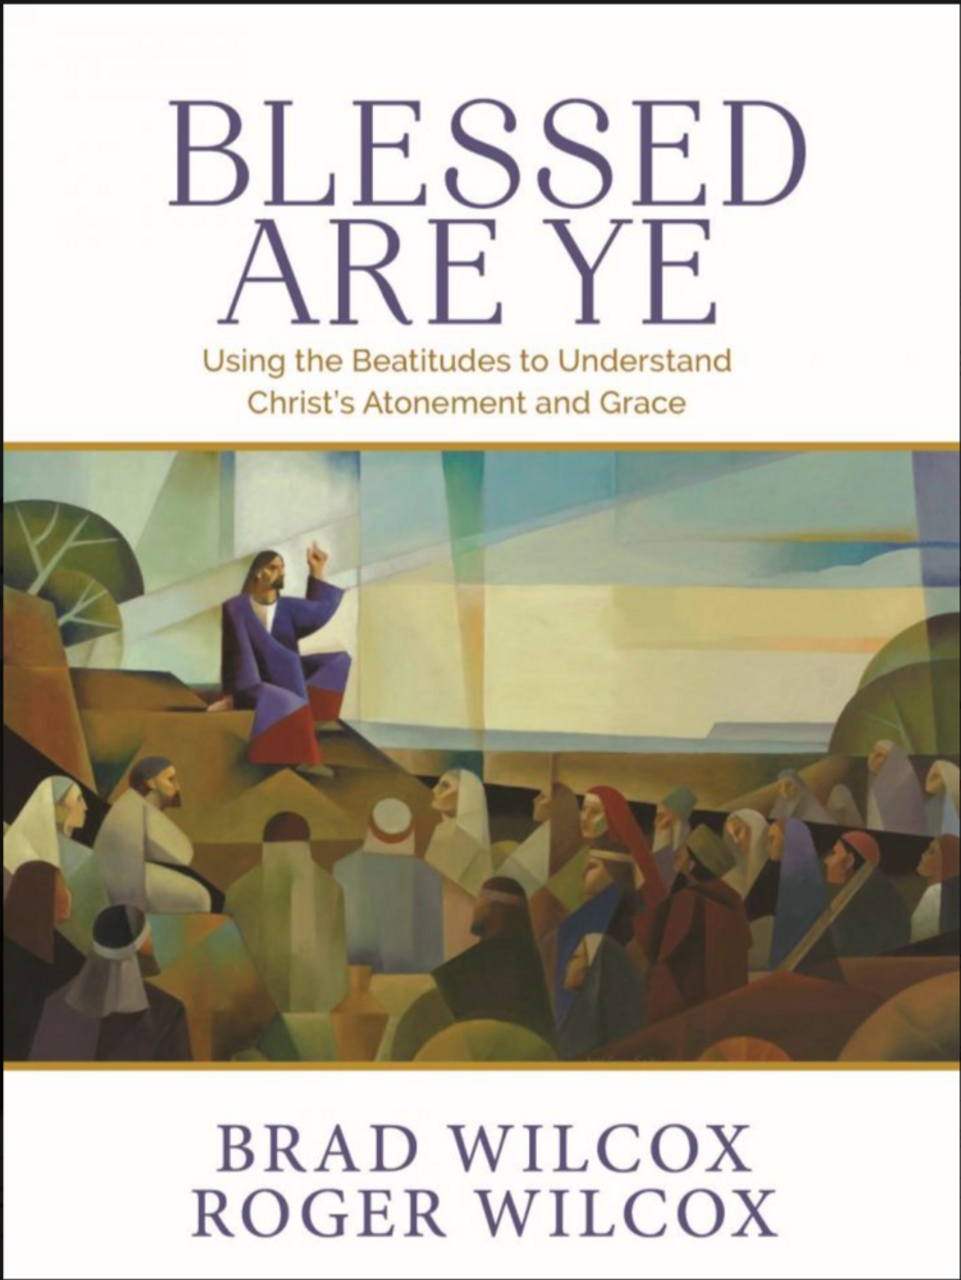 Blessed Are Ye: Using the Beatitudes to Understand Christ's Atonement and Grace(Hardcover)*